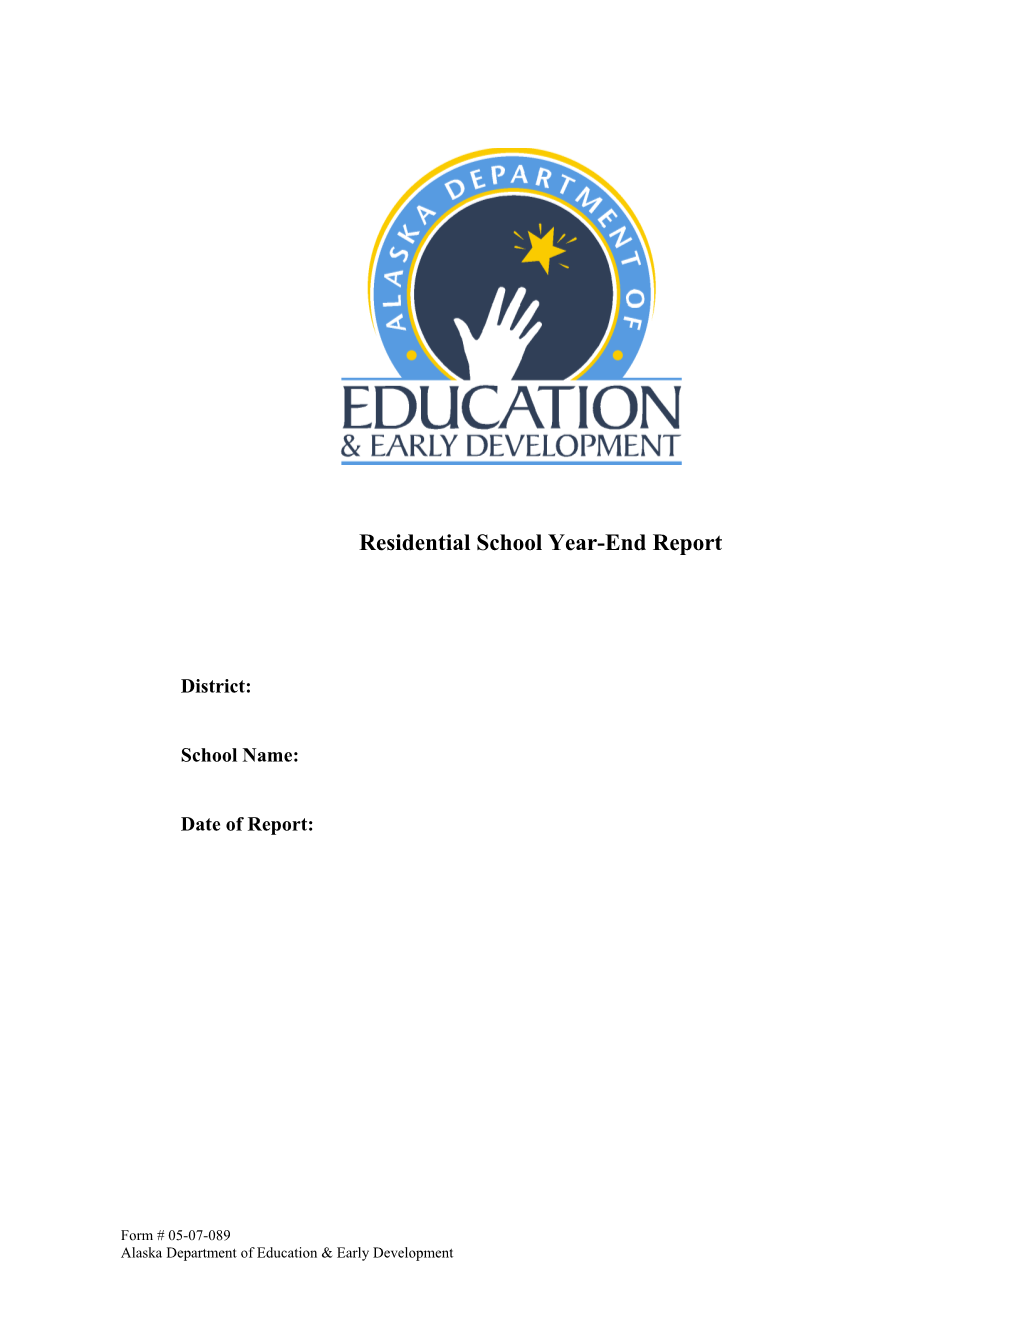 Residential Schoolyear-End Report